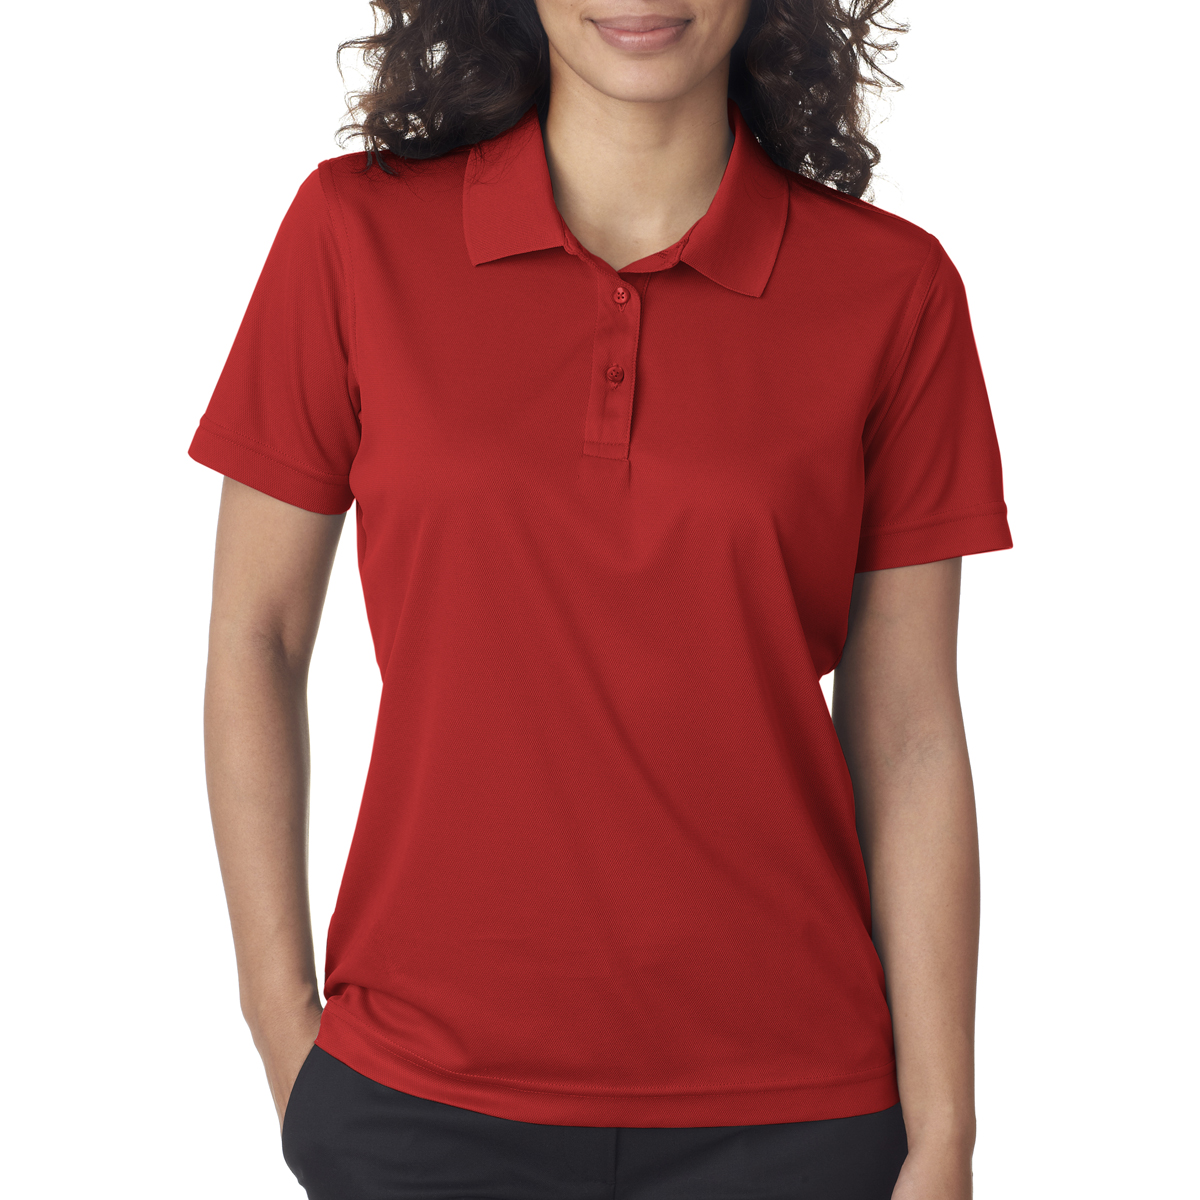 UltraClub 8210W Ladies Cool & Dry Mesh Pique Polo Shirts with 